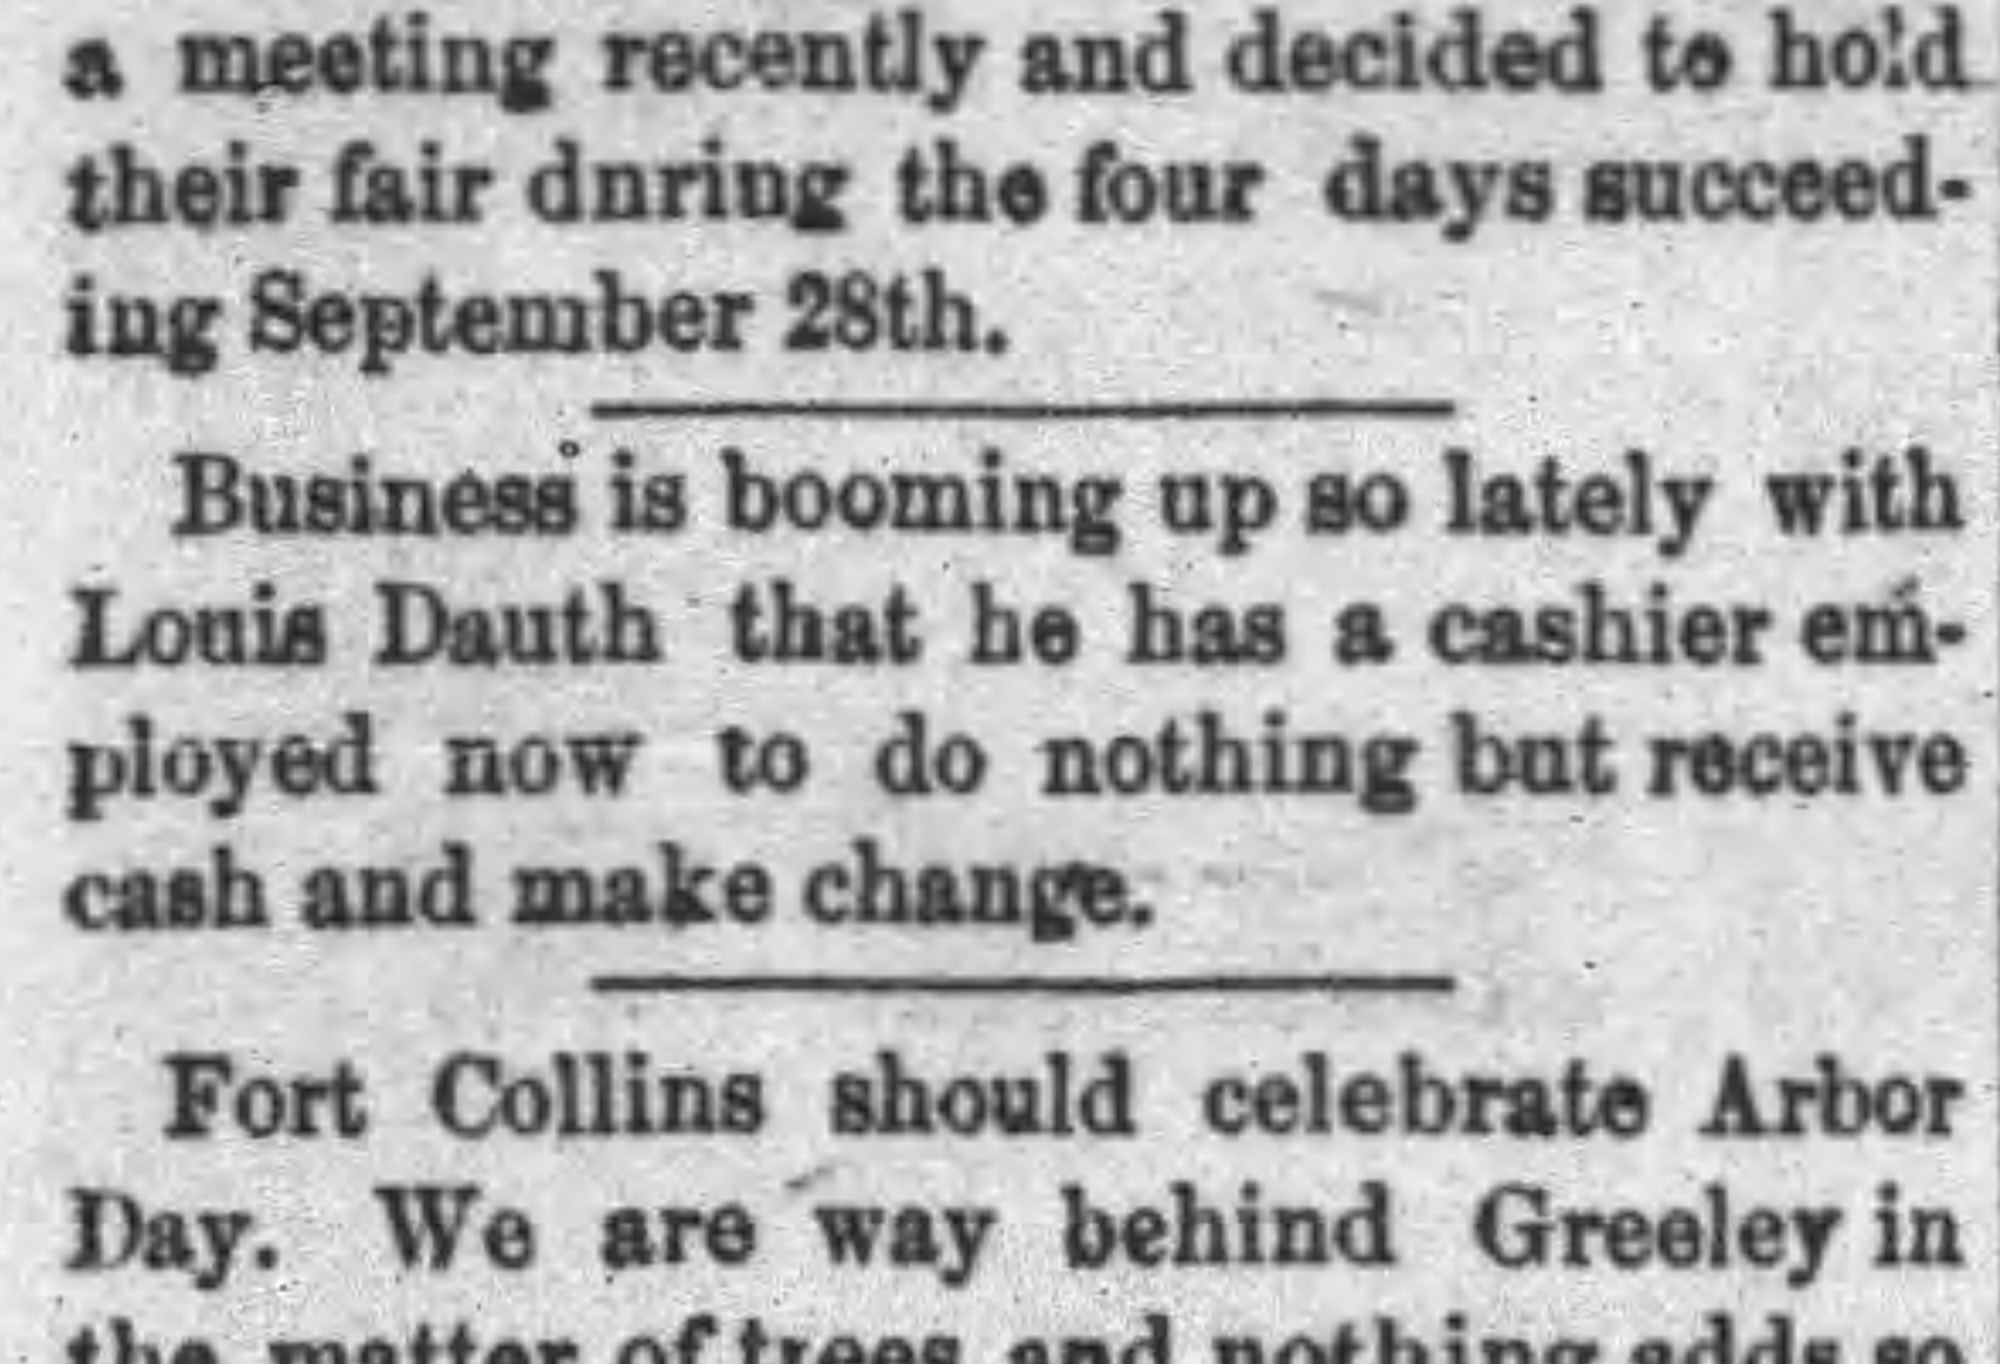 Dauth Family Archive - 1886-04-17 - The Fort Collins Express - Louis Dauth Hires Cashier